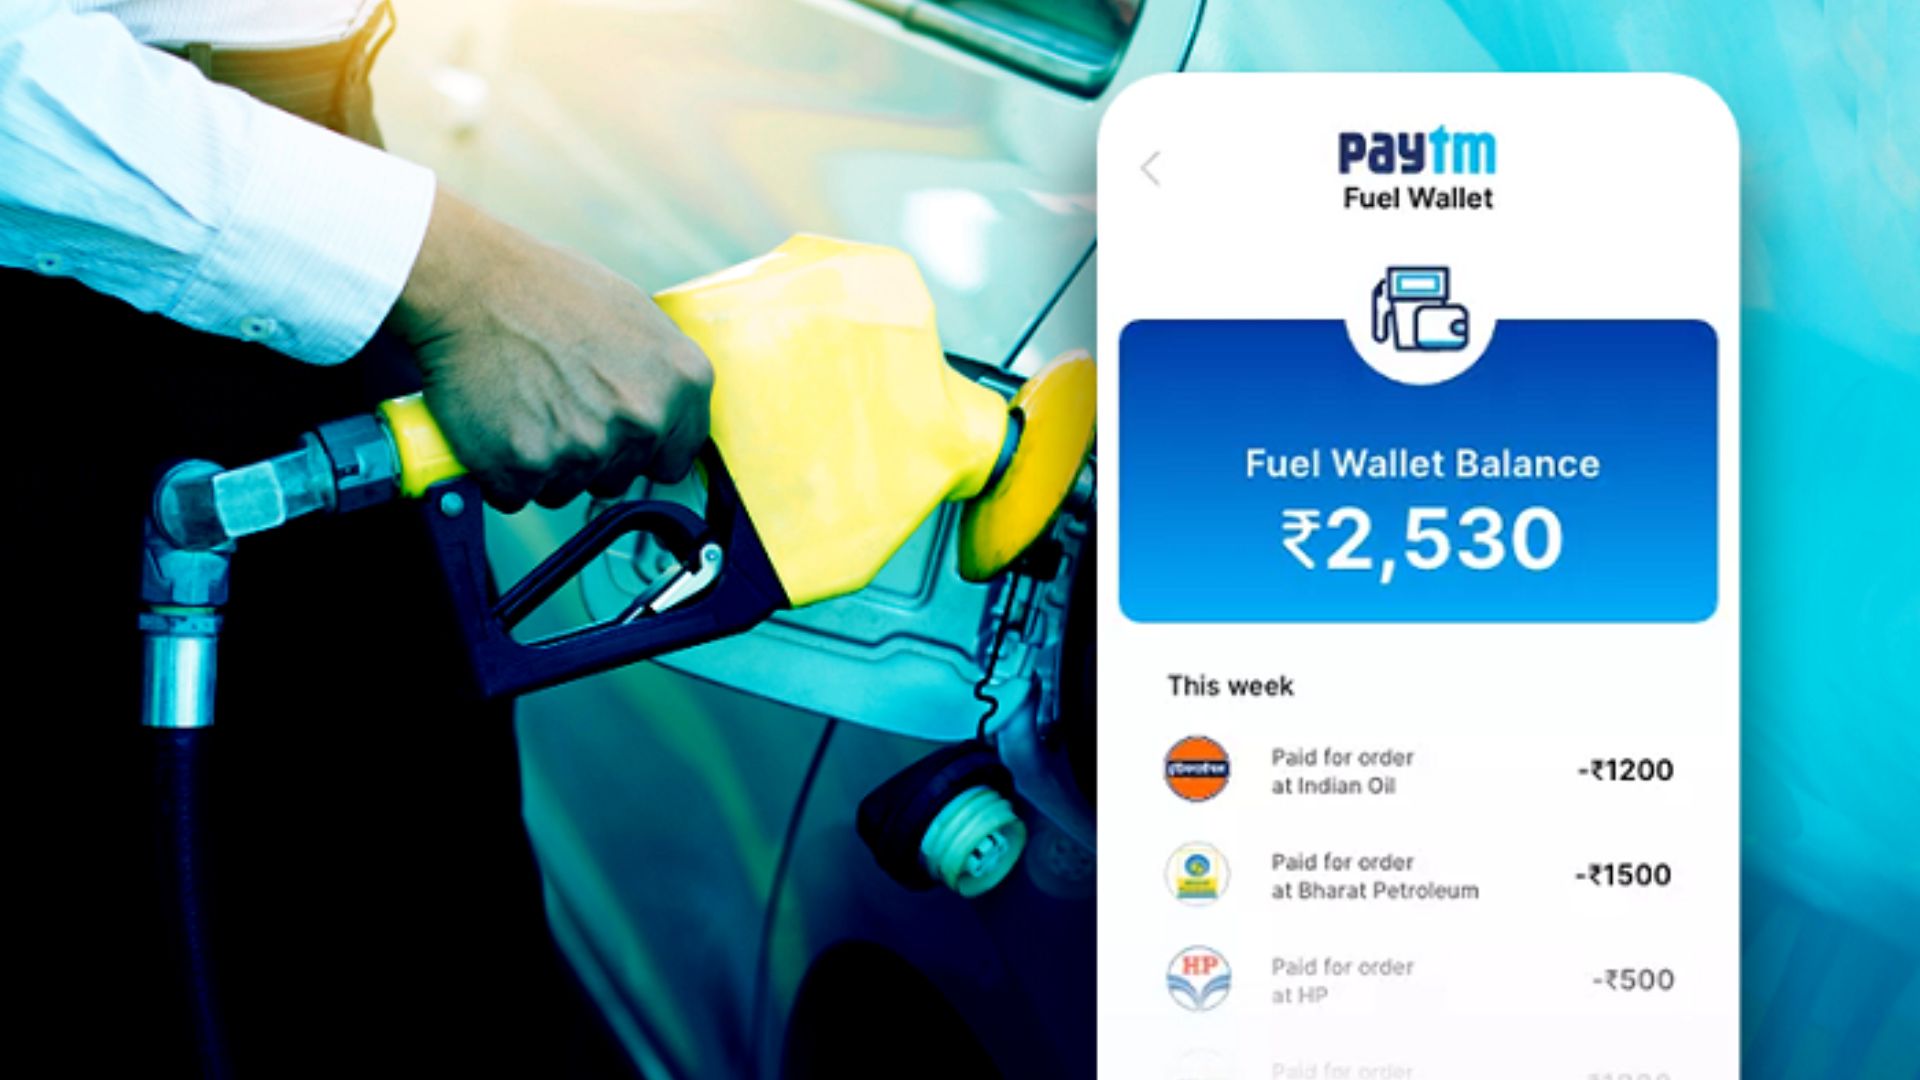 How to Use Paytm Fuel Wallet? All Advanced Benefits